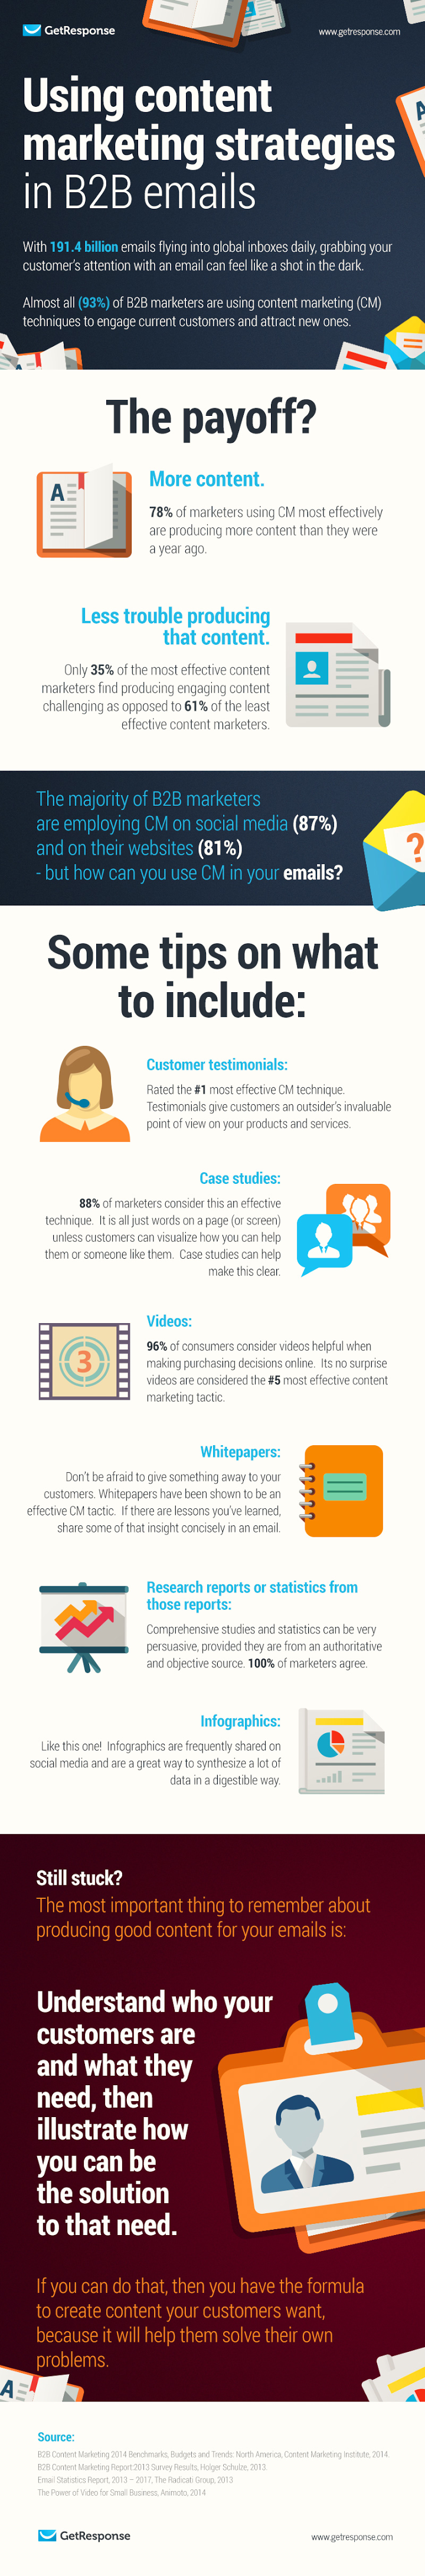 Using #ContentMarketing and Social Media Strategies in B2B Emails #Infographic